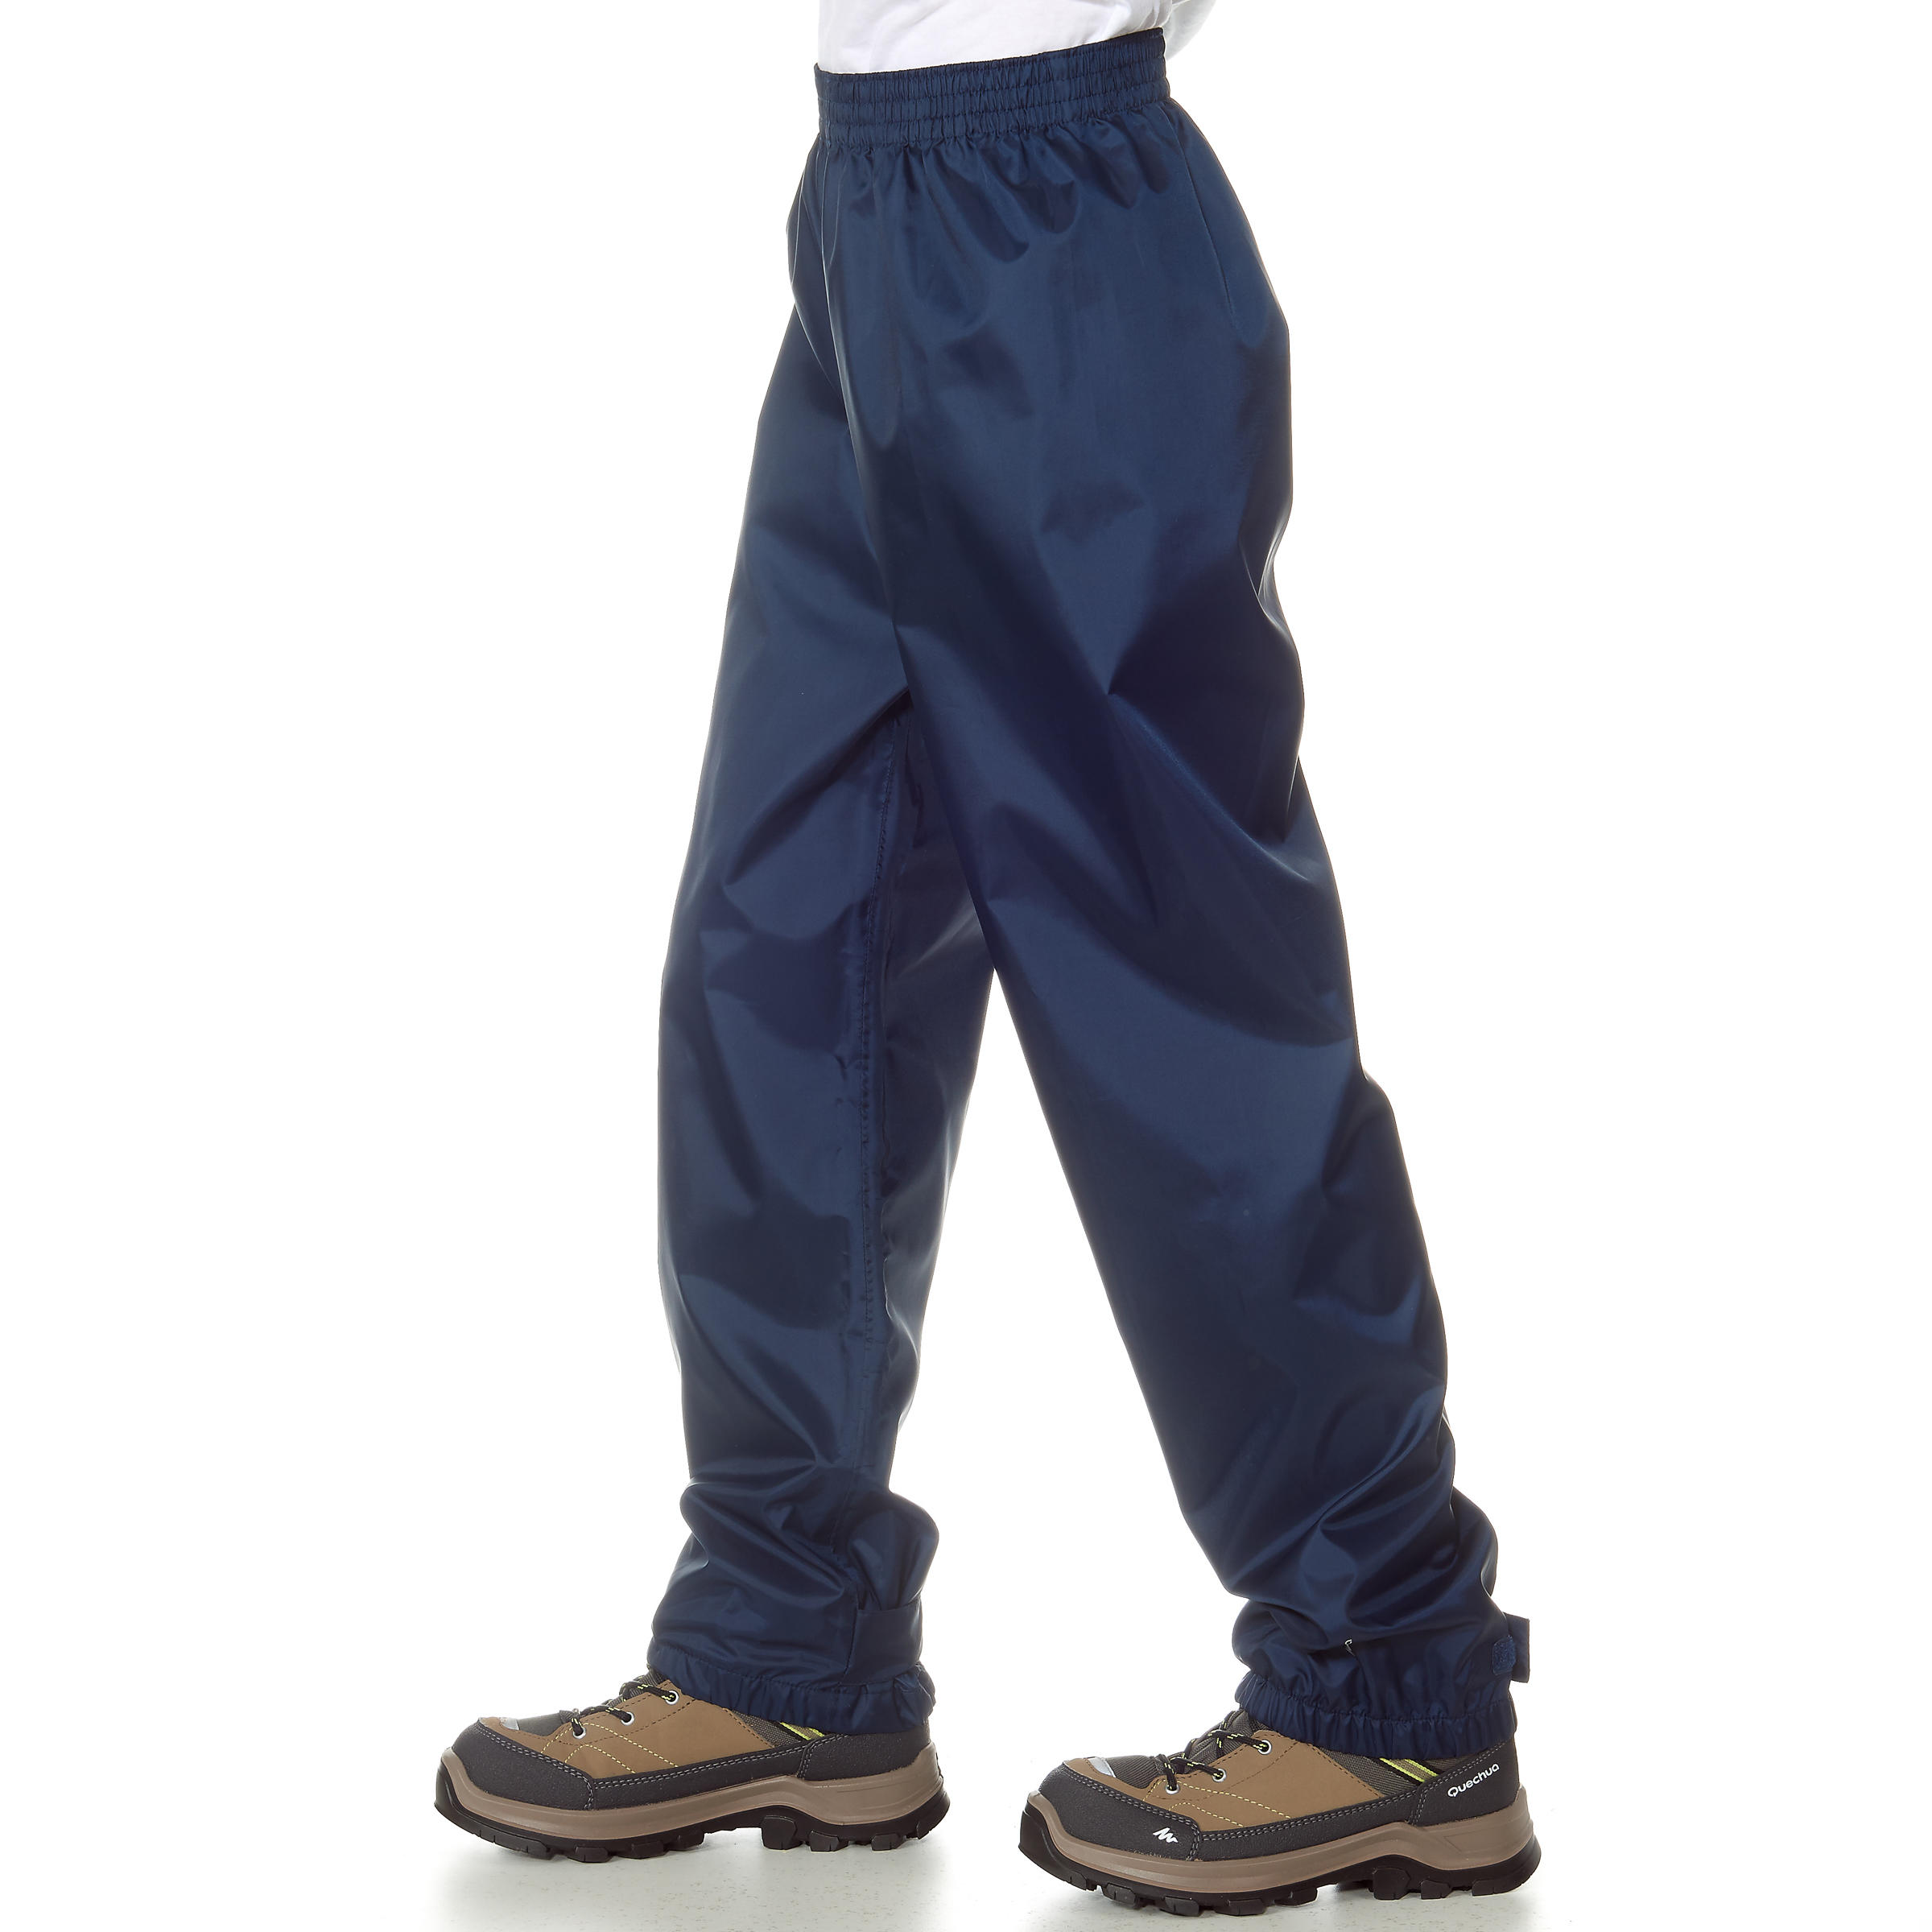 Kids' Hiking Waterproof Overtrousers MH100 2-6 Years 9/9